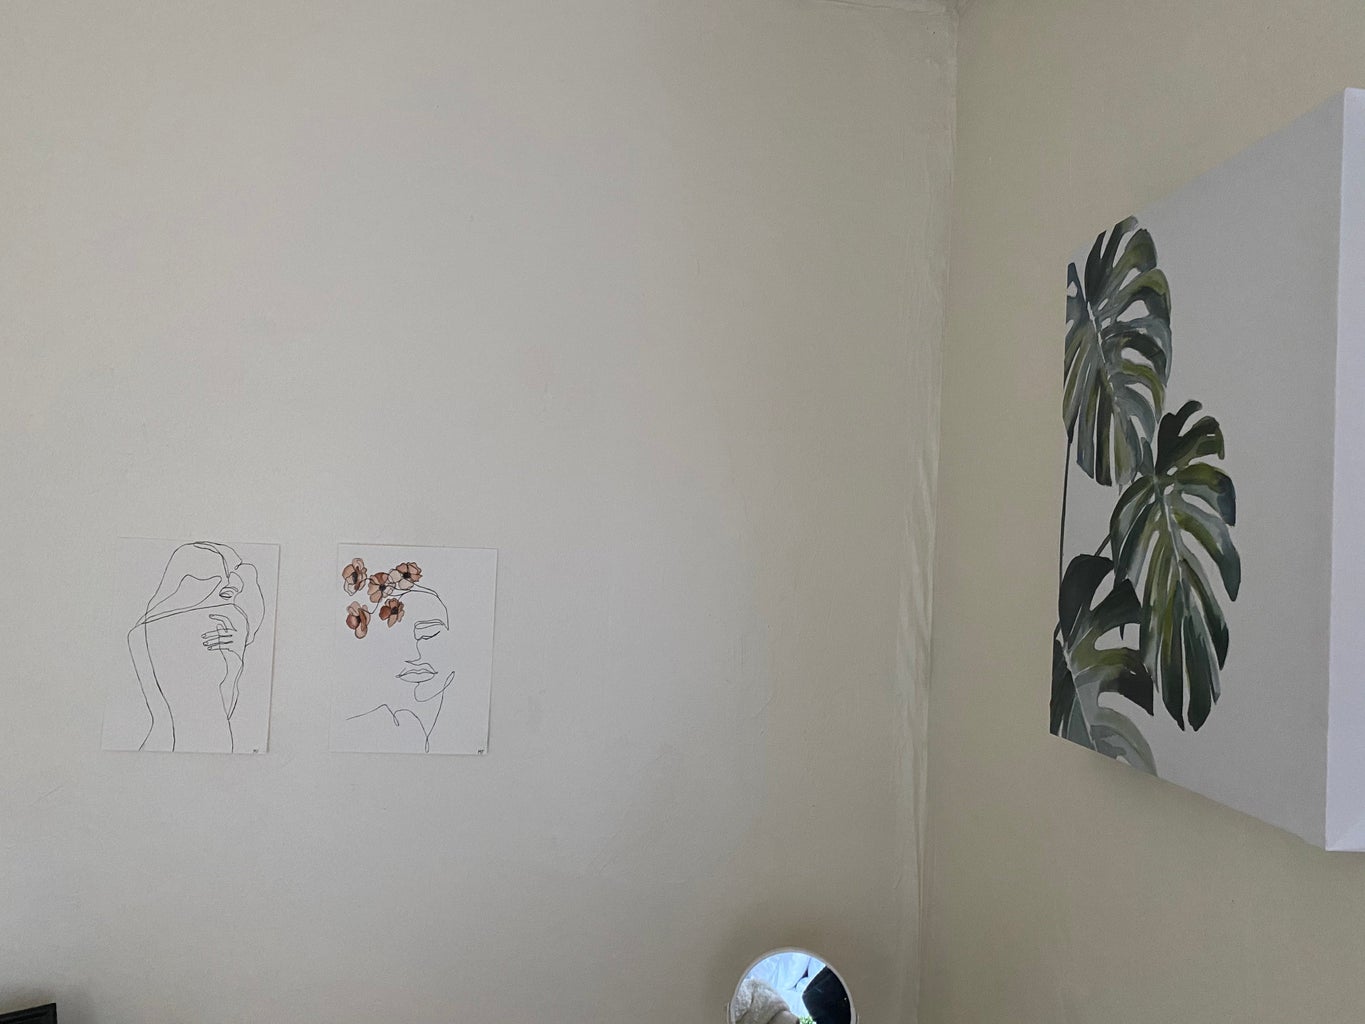 Wall pictures